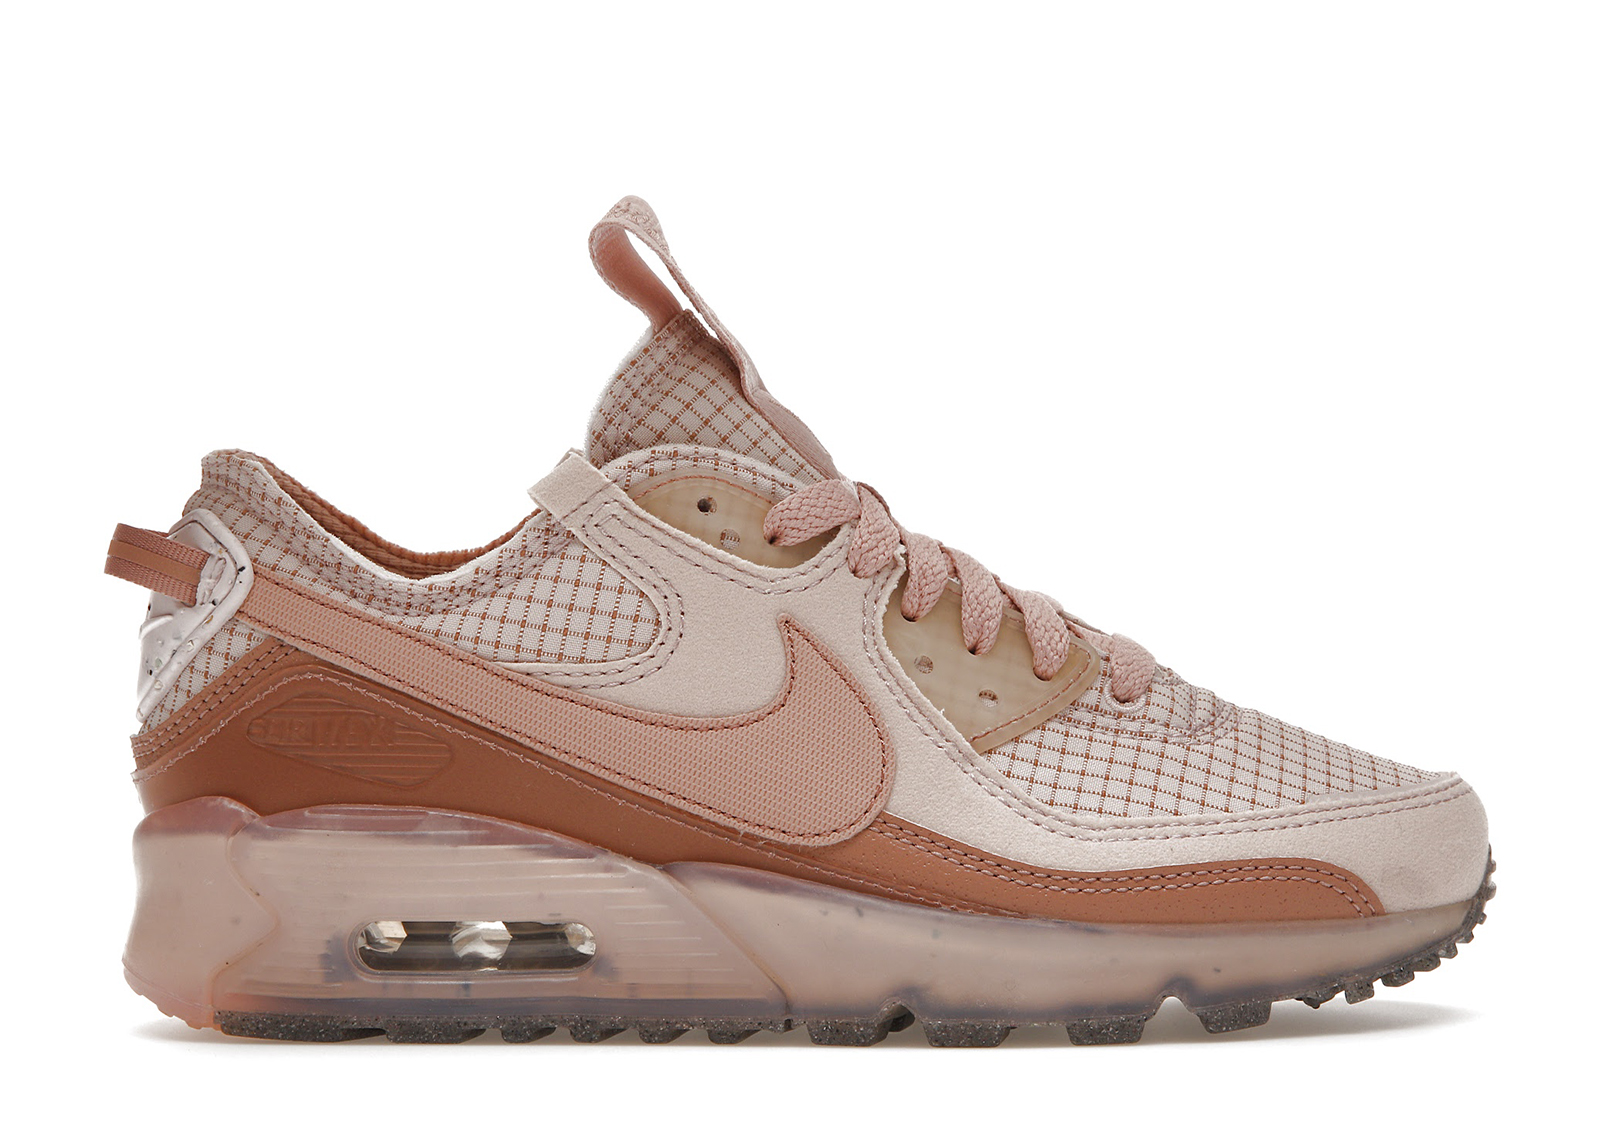 Nike Air Max 90 Terrascape Pink Oxford (Women's) - DH5073-600 - US